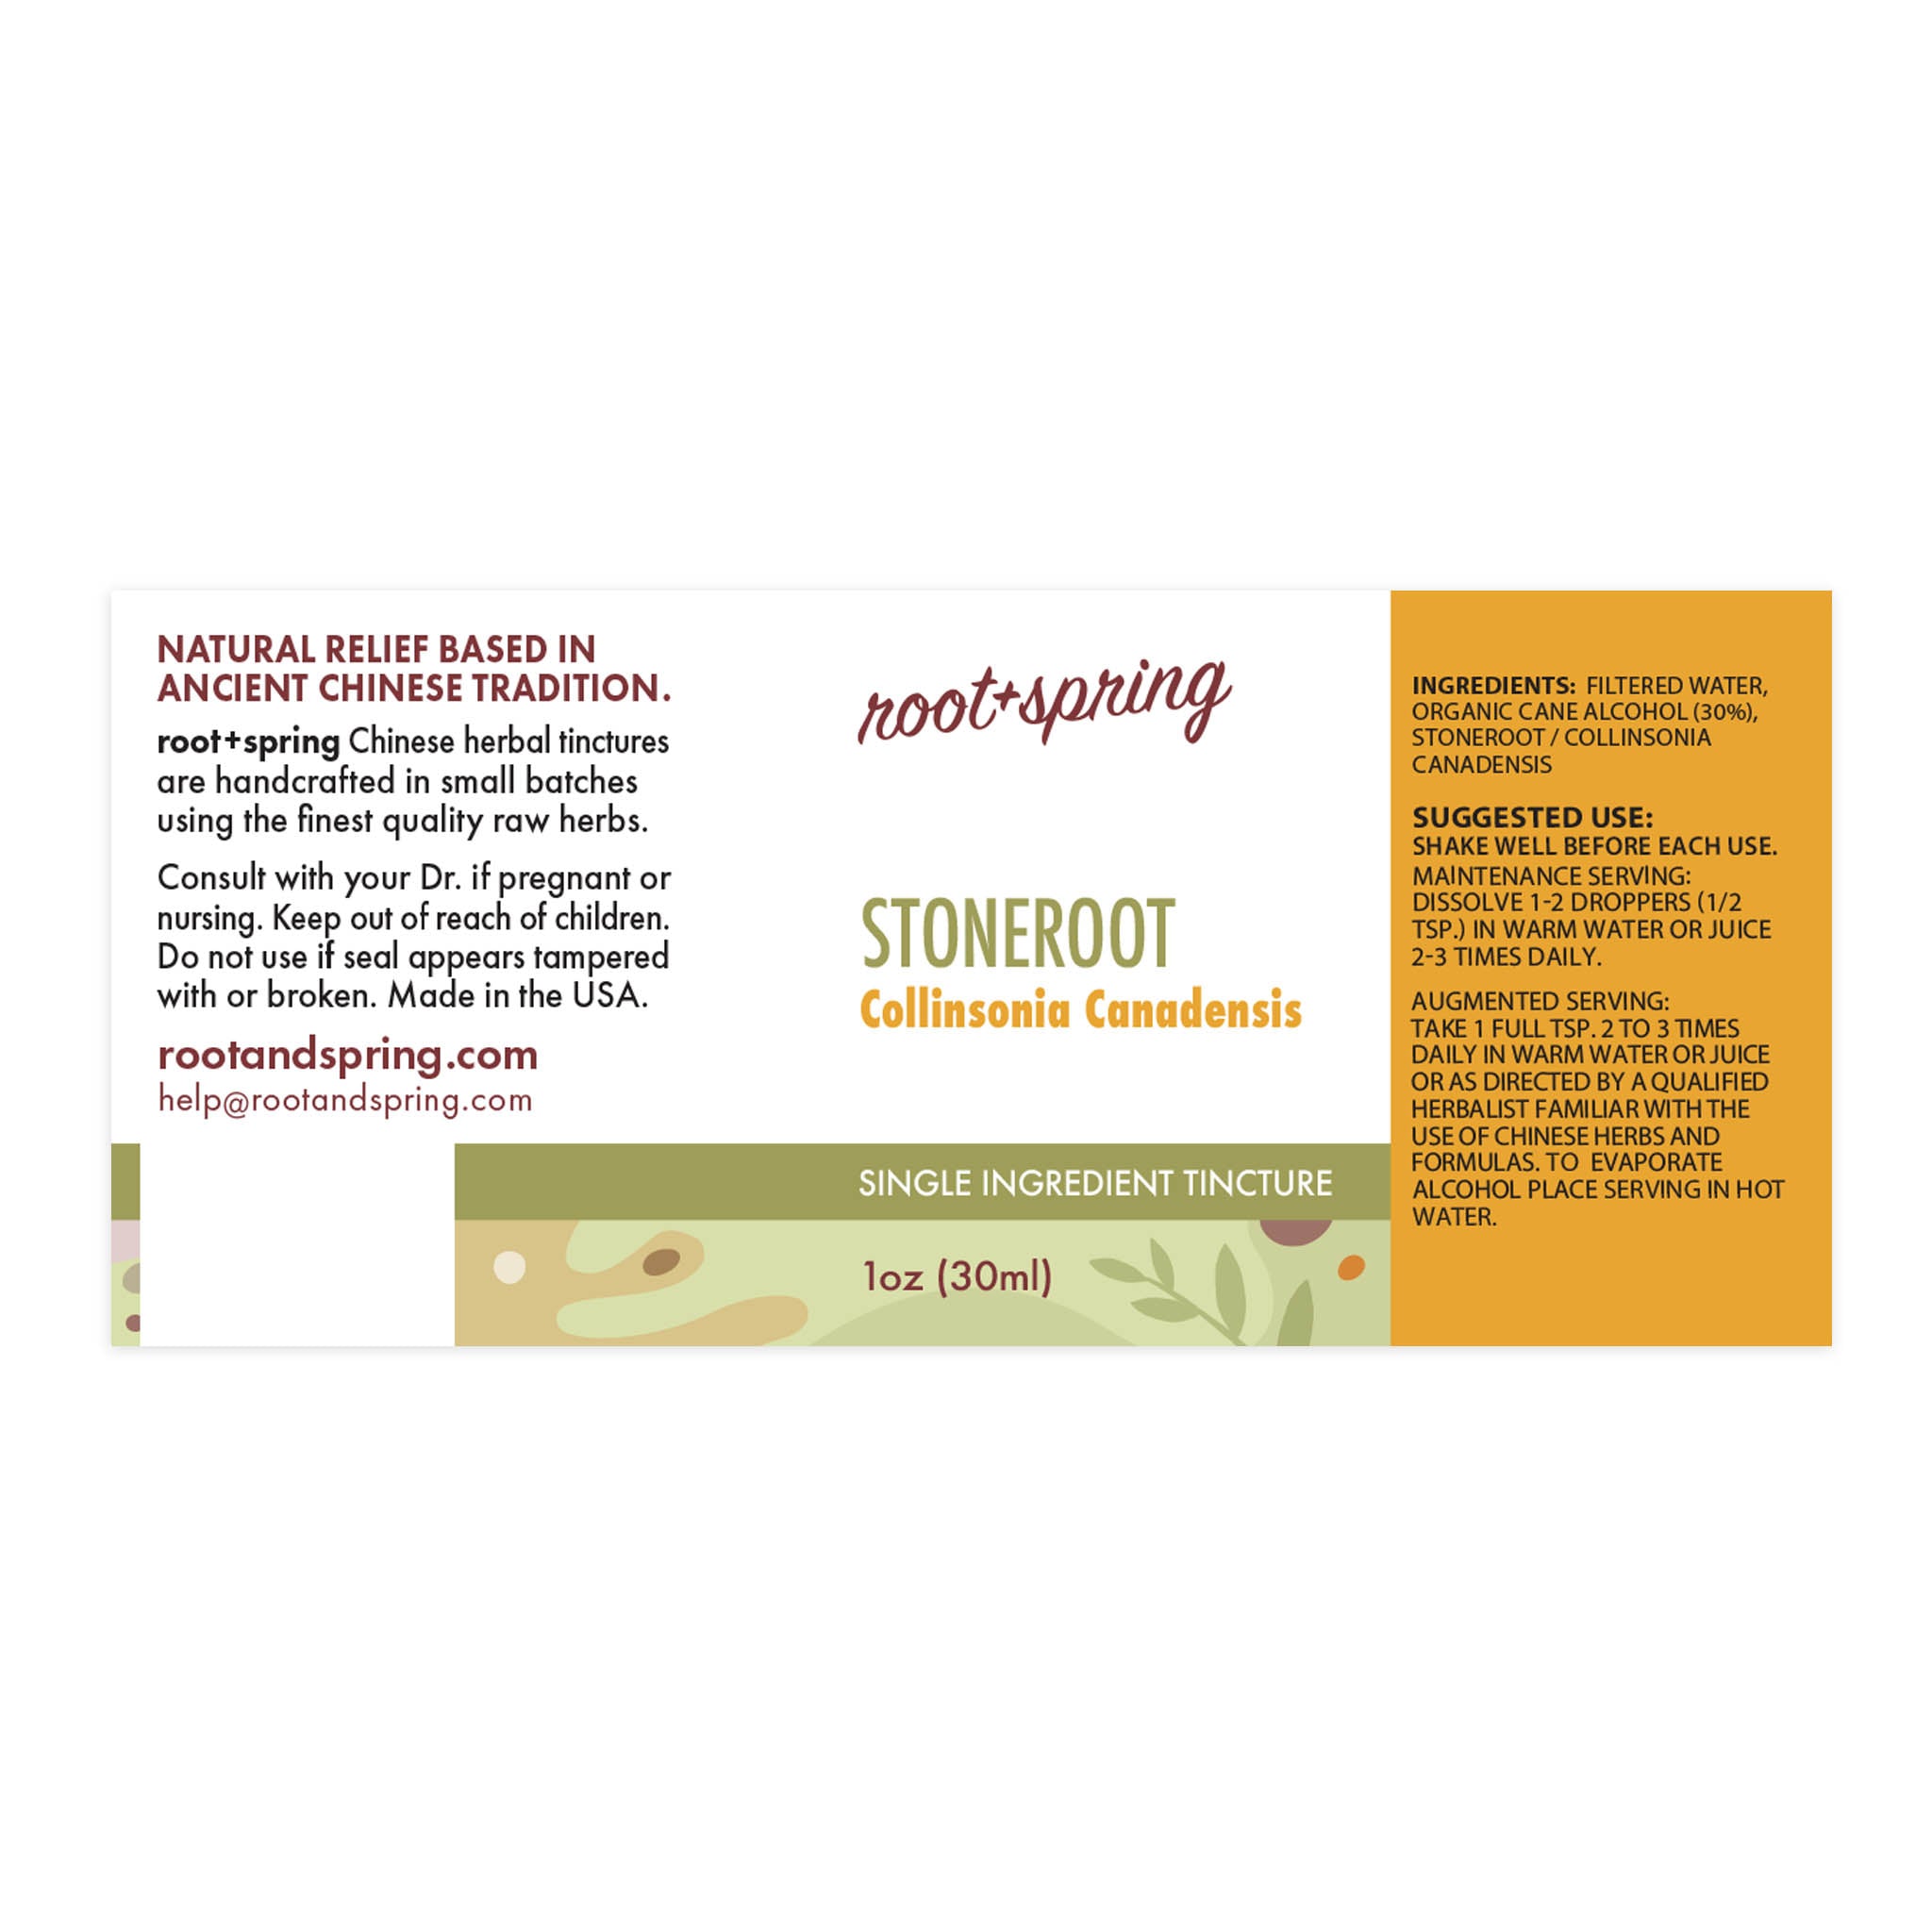 Label of Stoneroot (Collinsonia Canadensis) - Herbal Tincture by root + spring